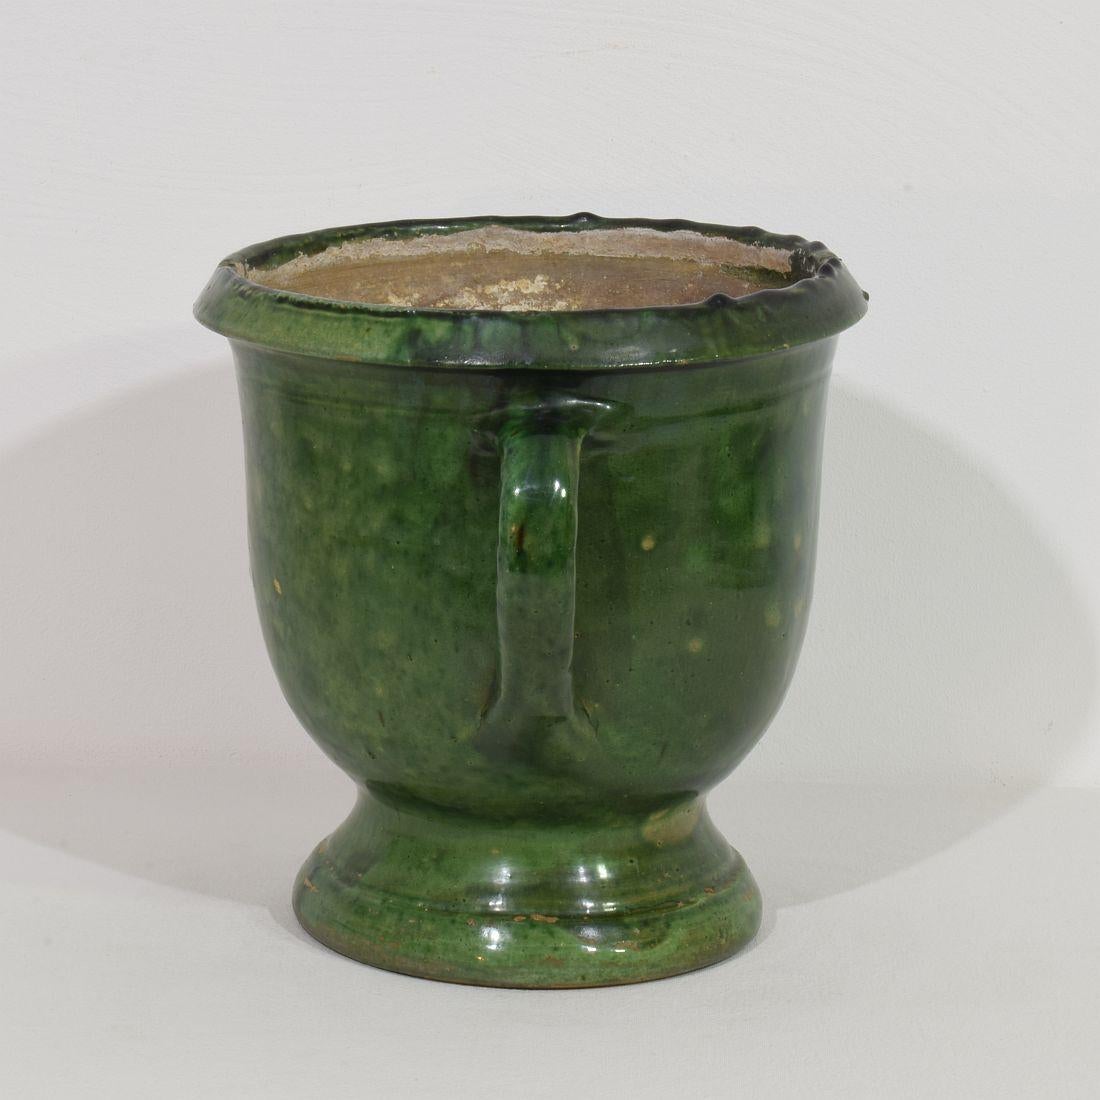 French Provincial French 19th Century Green Glazed Earthenware Castelnaudary Planter For Sale